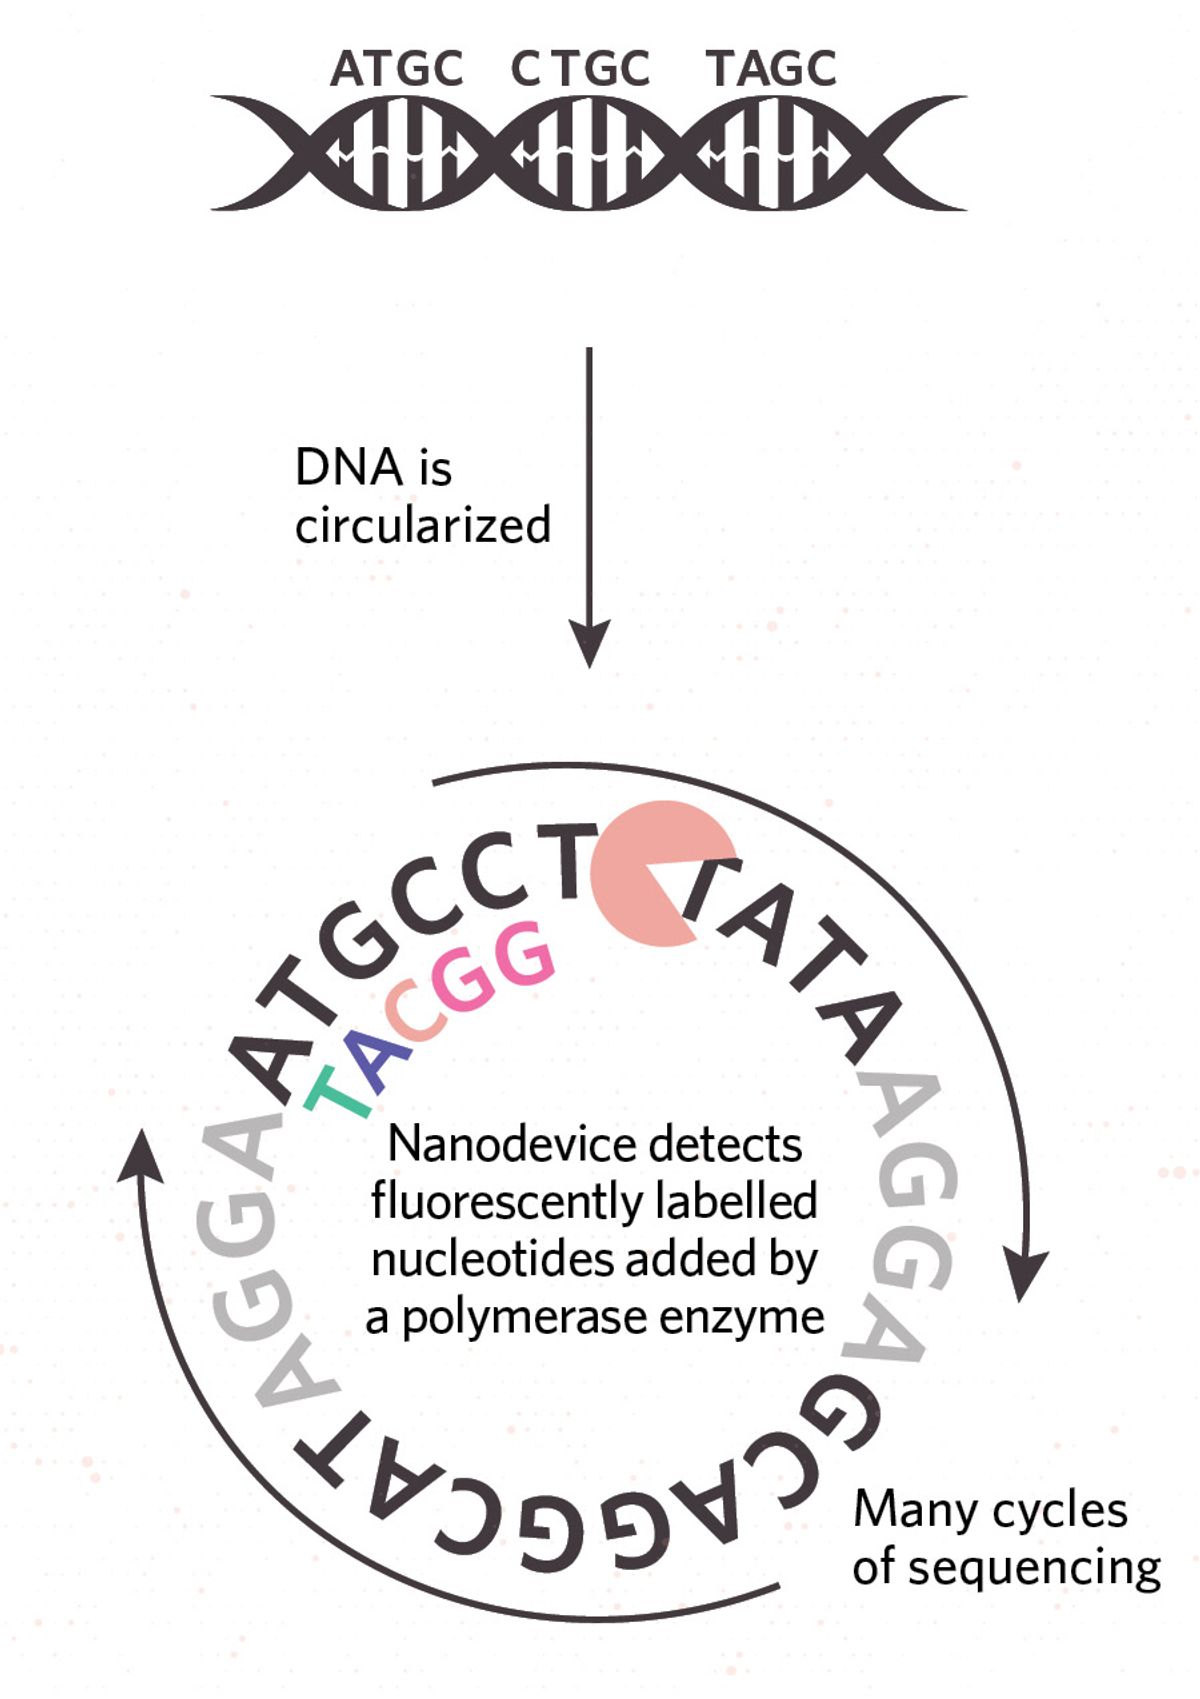 Illustration showing high-fidelity sequencing